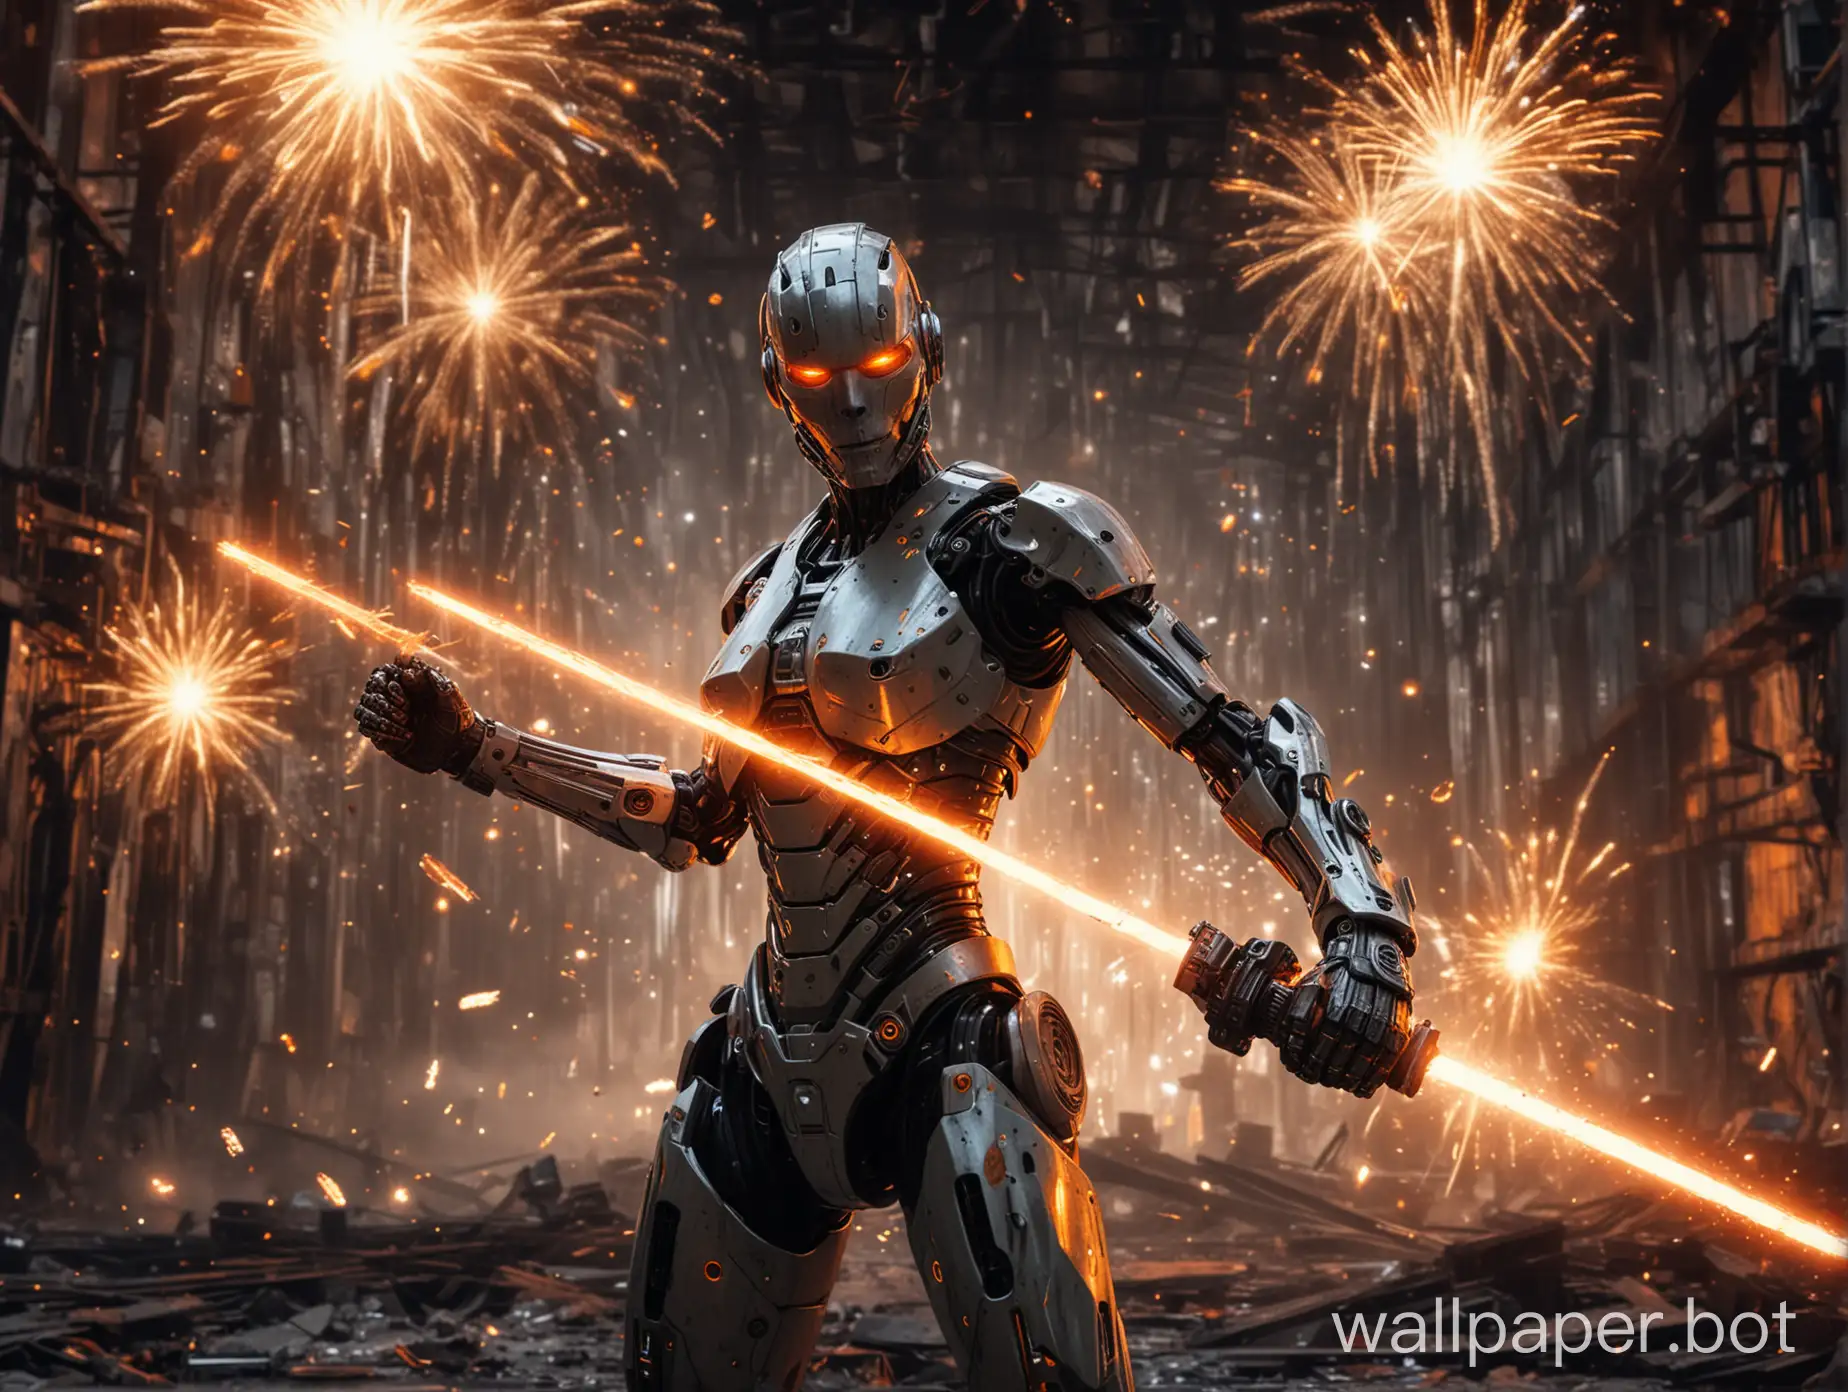 half human cyborg in a epic pose with laser sword in a industrial site with a lot of laser orange black with a background of metal sheets and fireworks from metal